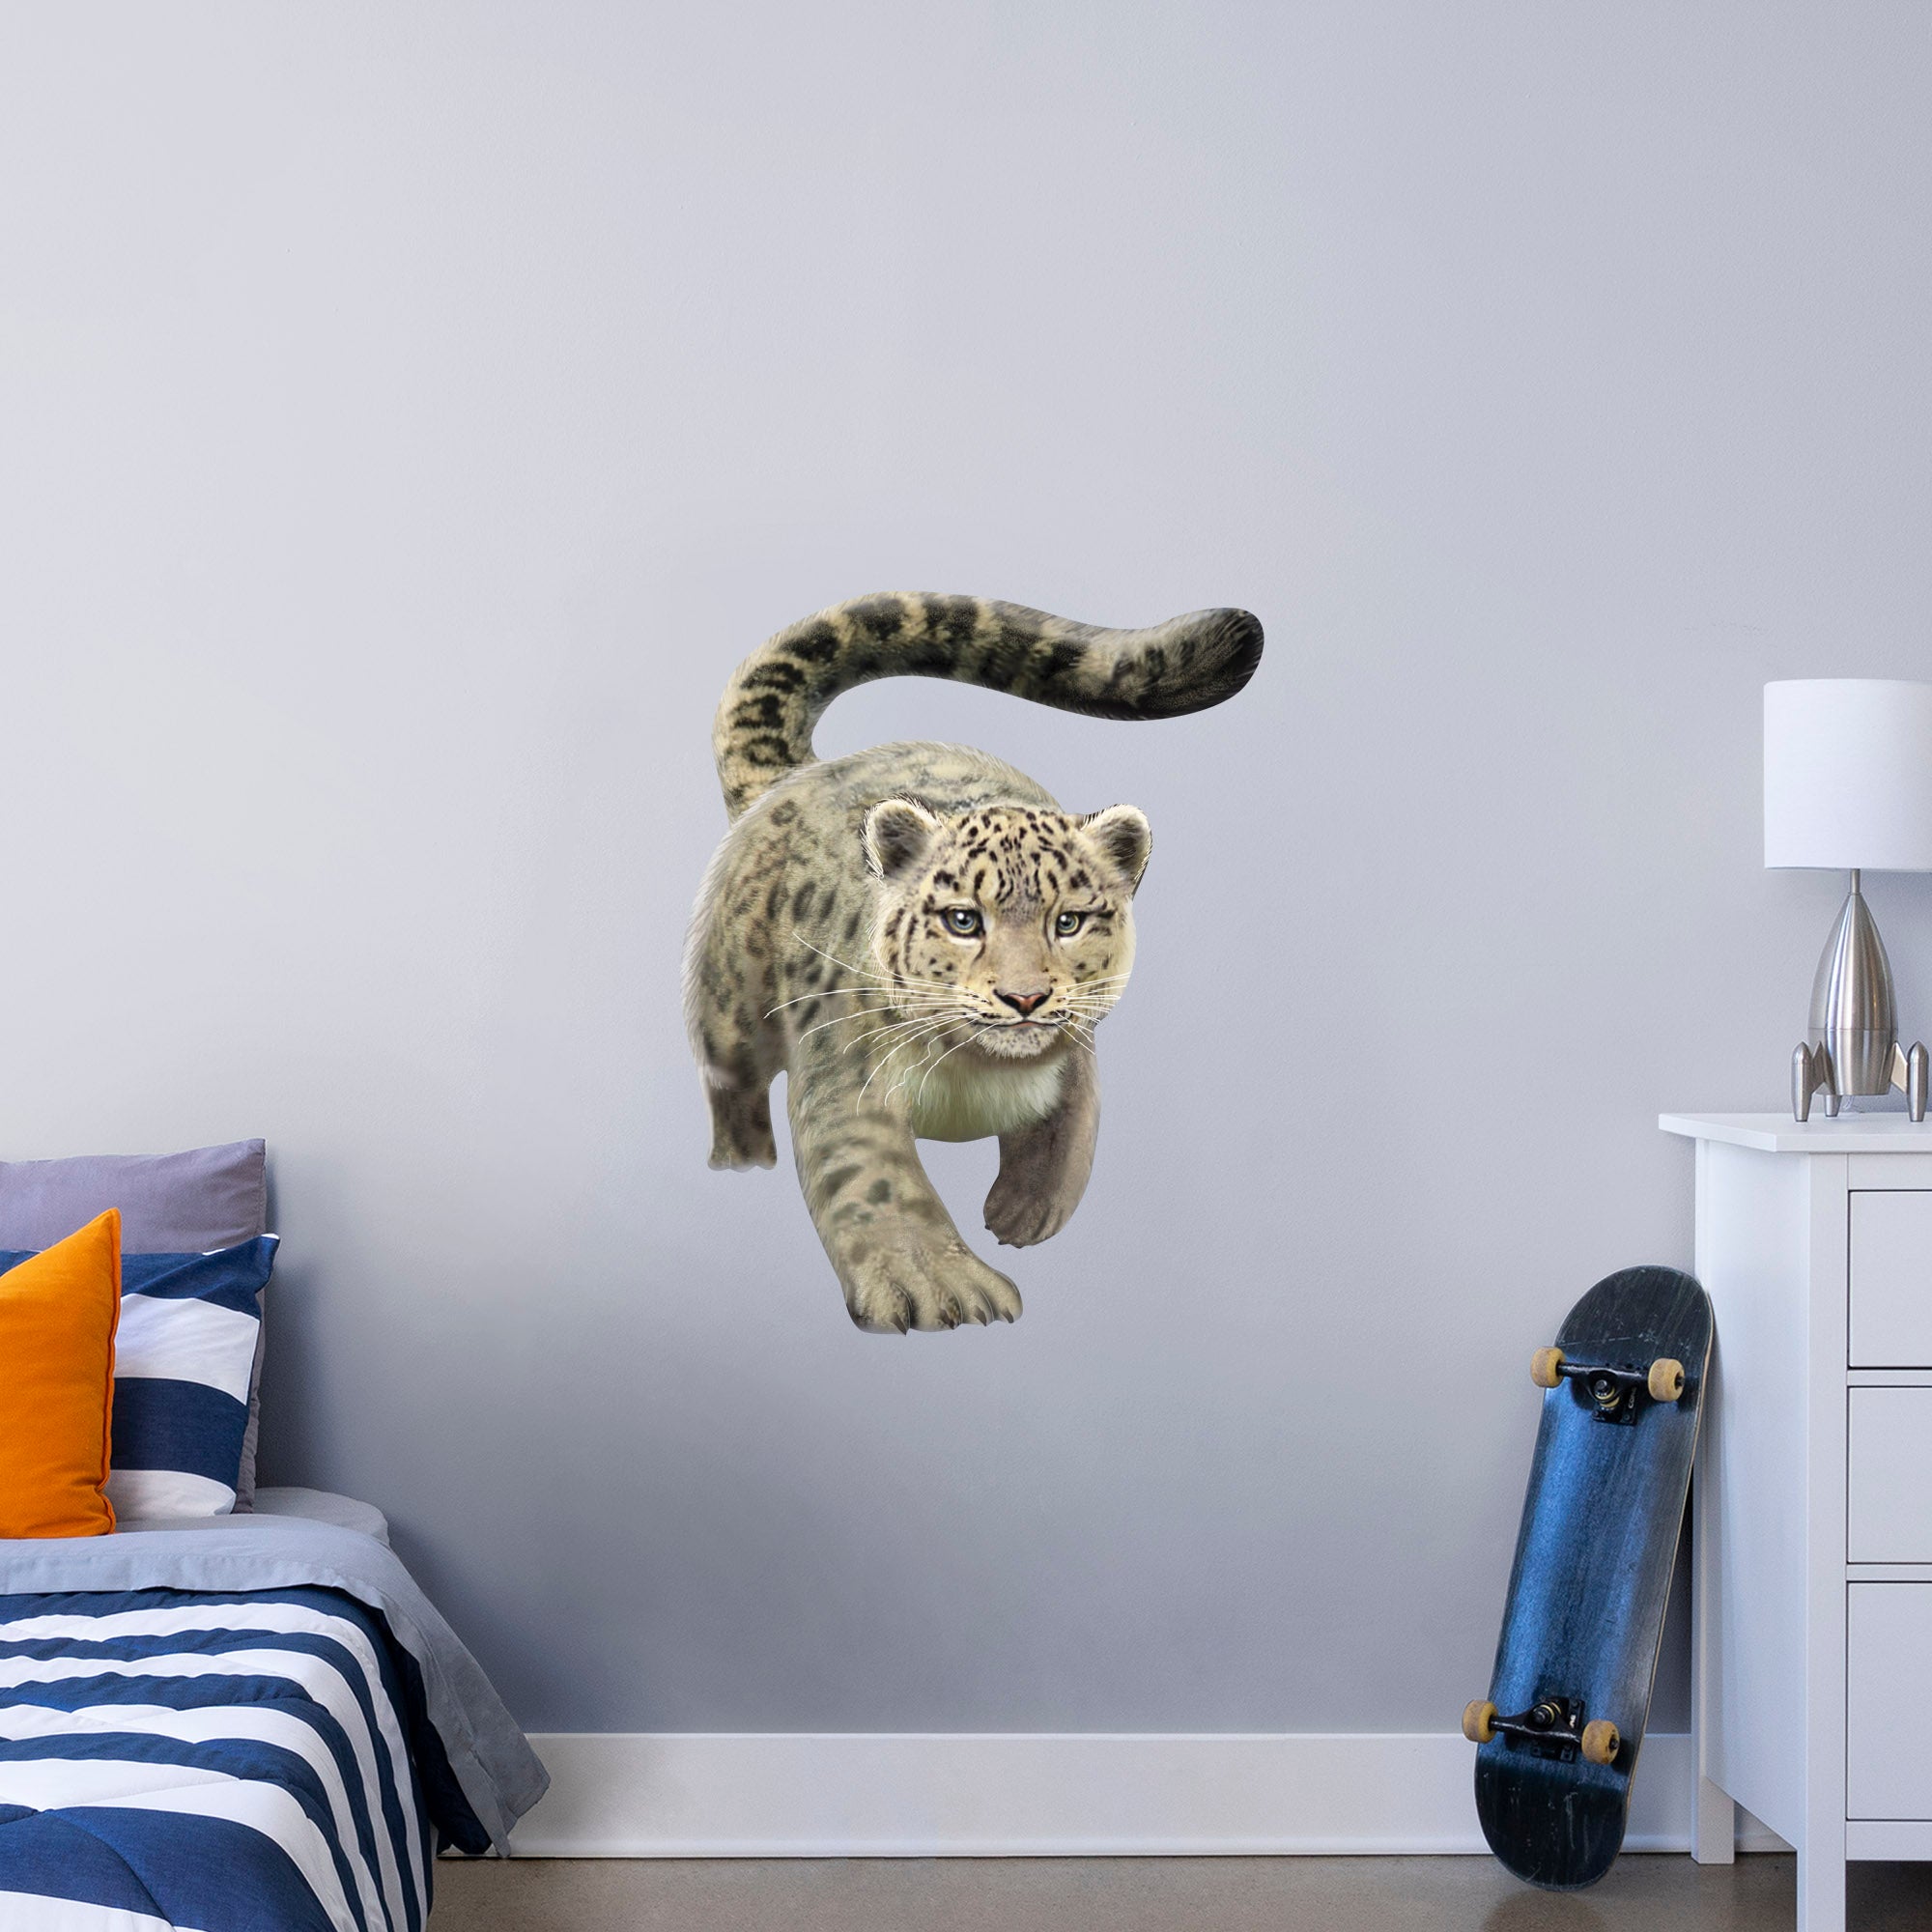 Snow Leopard - Removable Wall Decal Giant Decal by Fathead | Vinyl